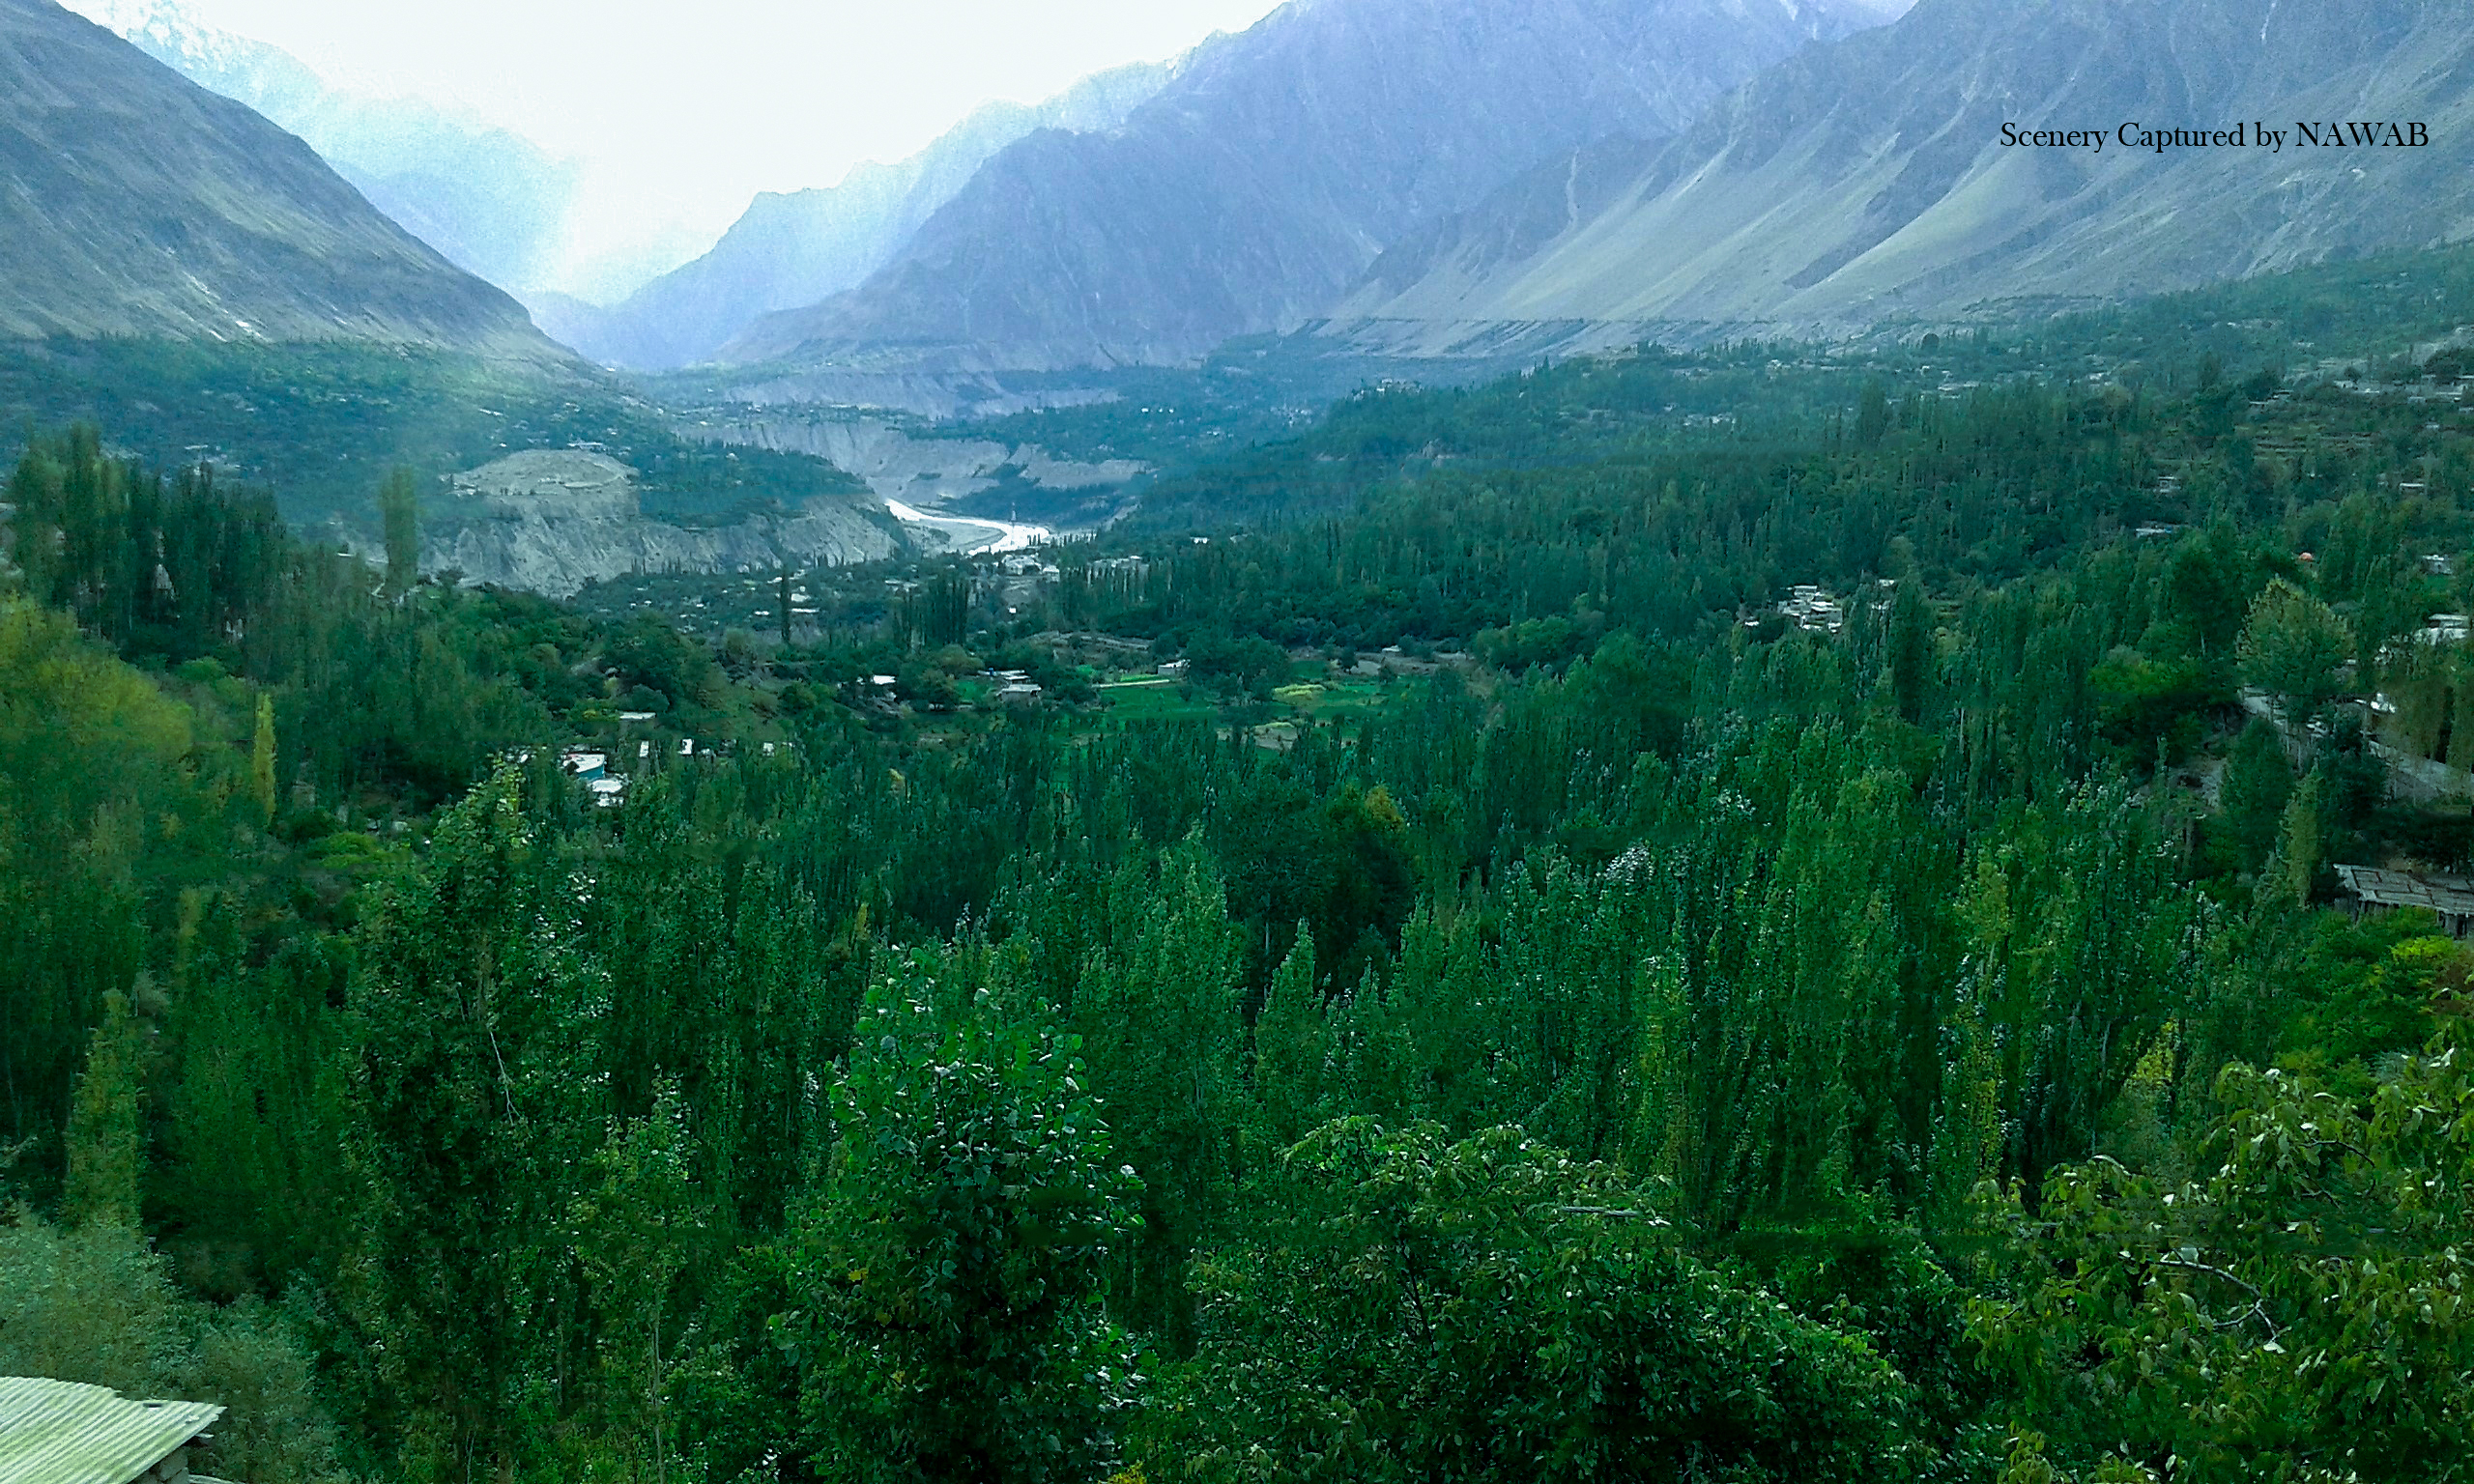 Day 5: Gilgit to Karimabad (Hunza Valley)